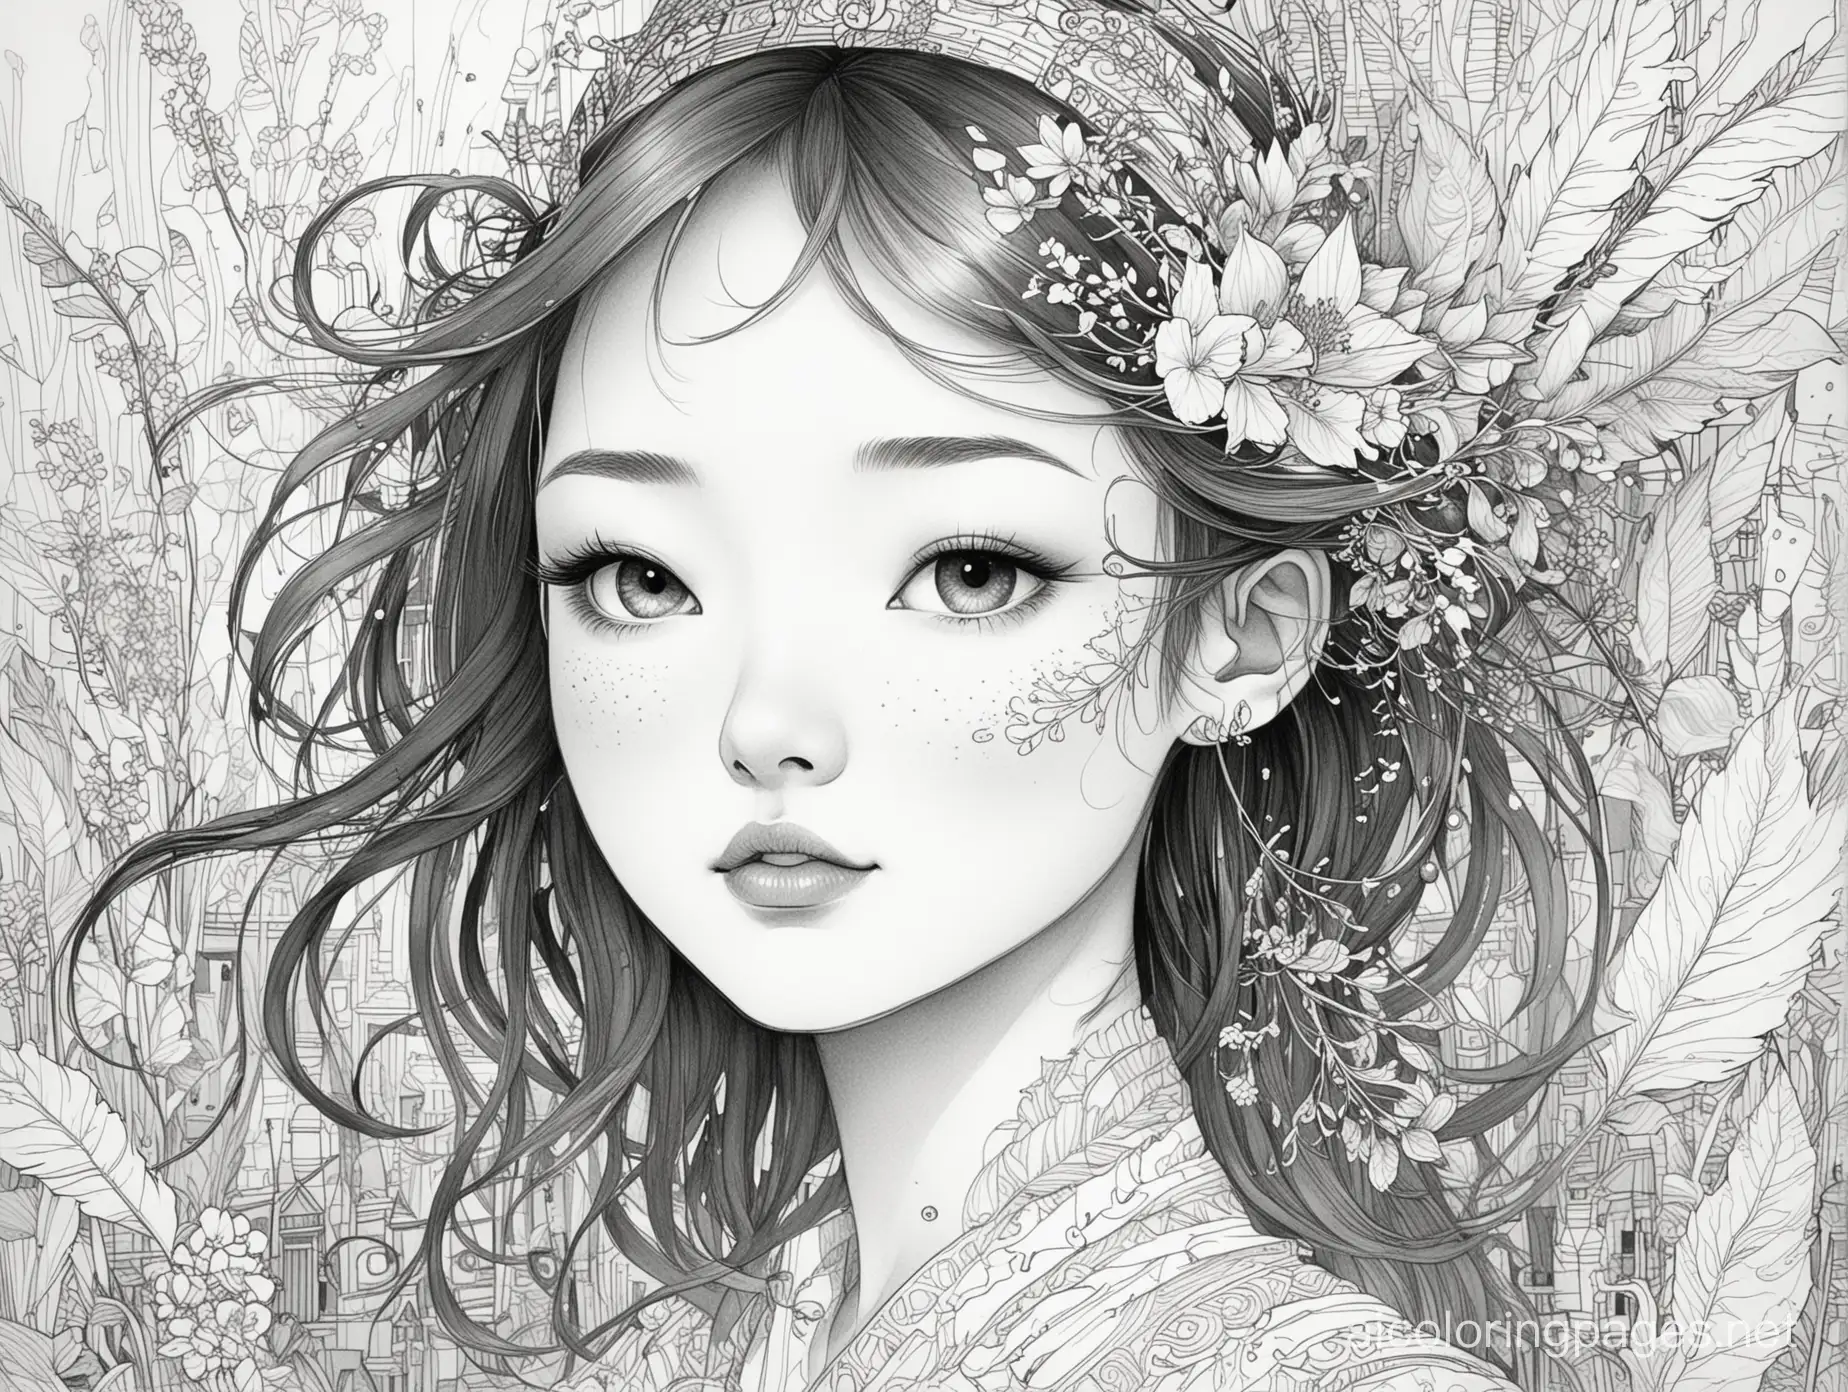 Victo Ngai , Evyind Earle, Mikki Lee, Coloring Page, black and white, line art, white background, Simplicity, Ample White Space. The background of the coloring page is plain white to make it easy for young children to color within the lines. The outlines of all the subjects are easy to distinguish, making it simple for kids to color without too much difficulty